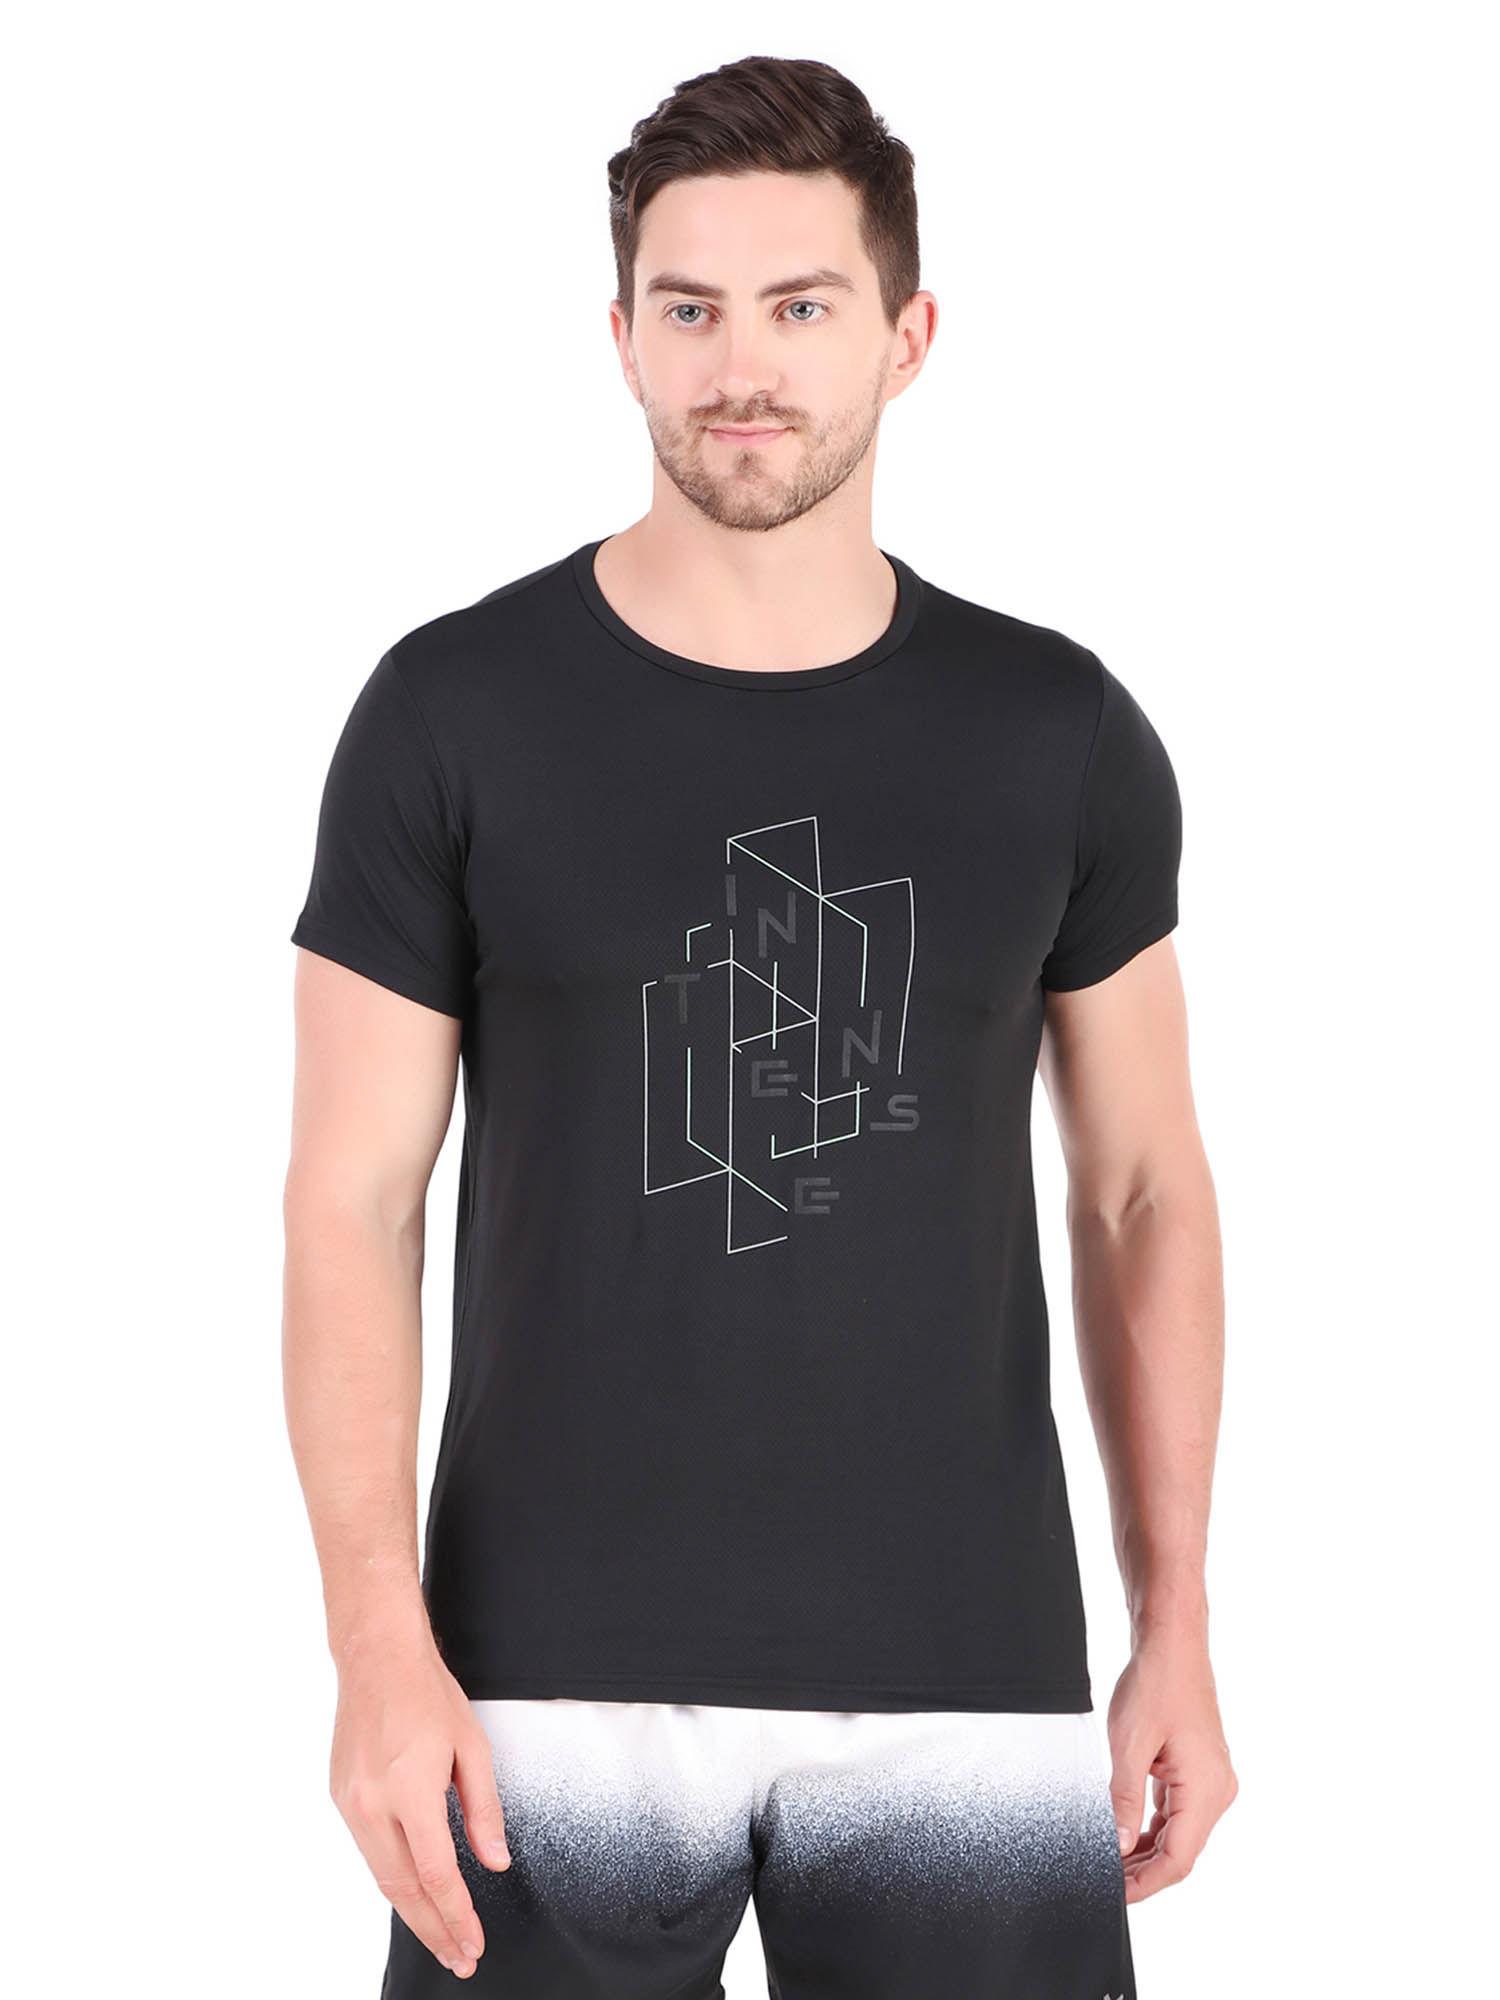 printed-black-mens-dry-fit-workout-top-sports-gym-t-shirt